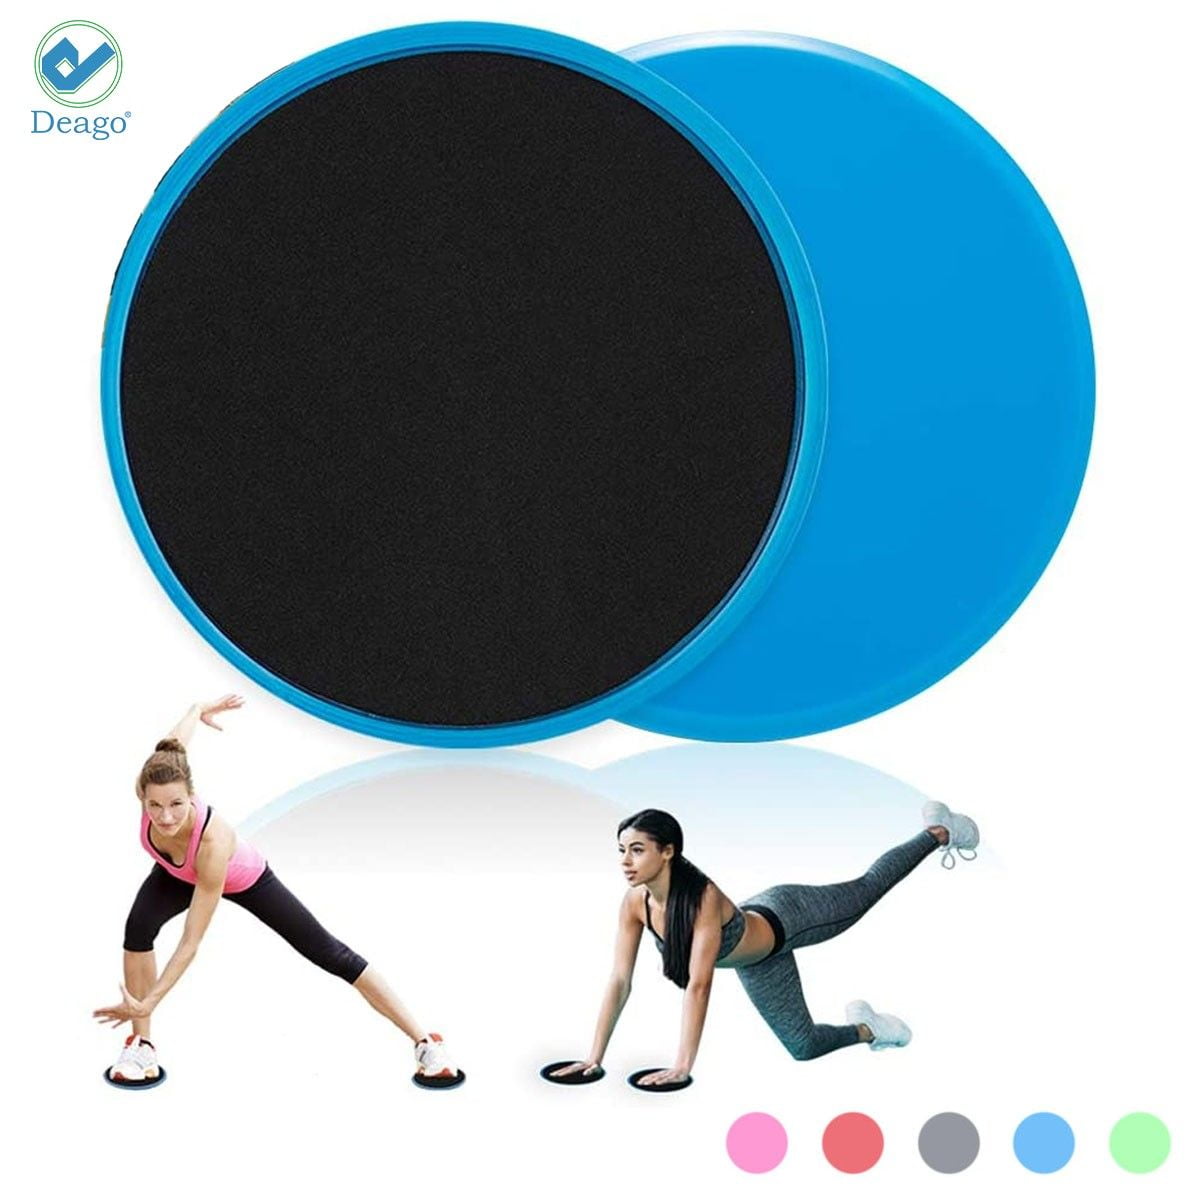 1 Pair Core Sliders Gliding Discs Full Body Workout and Conditioning - Dual Sided for Use on Carpet or Hardwood Floors 